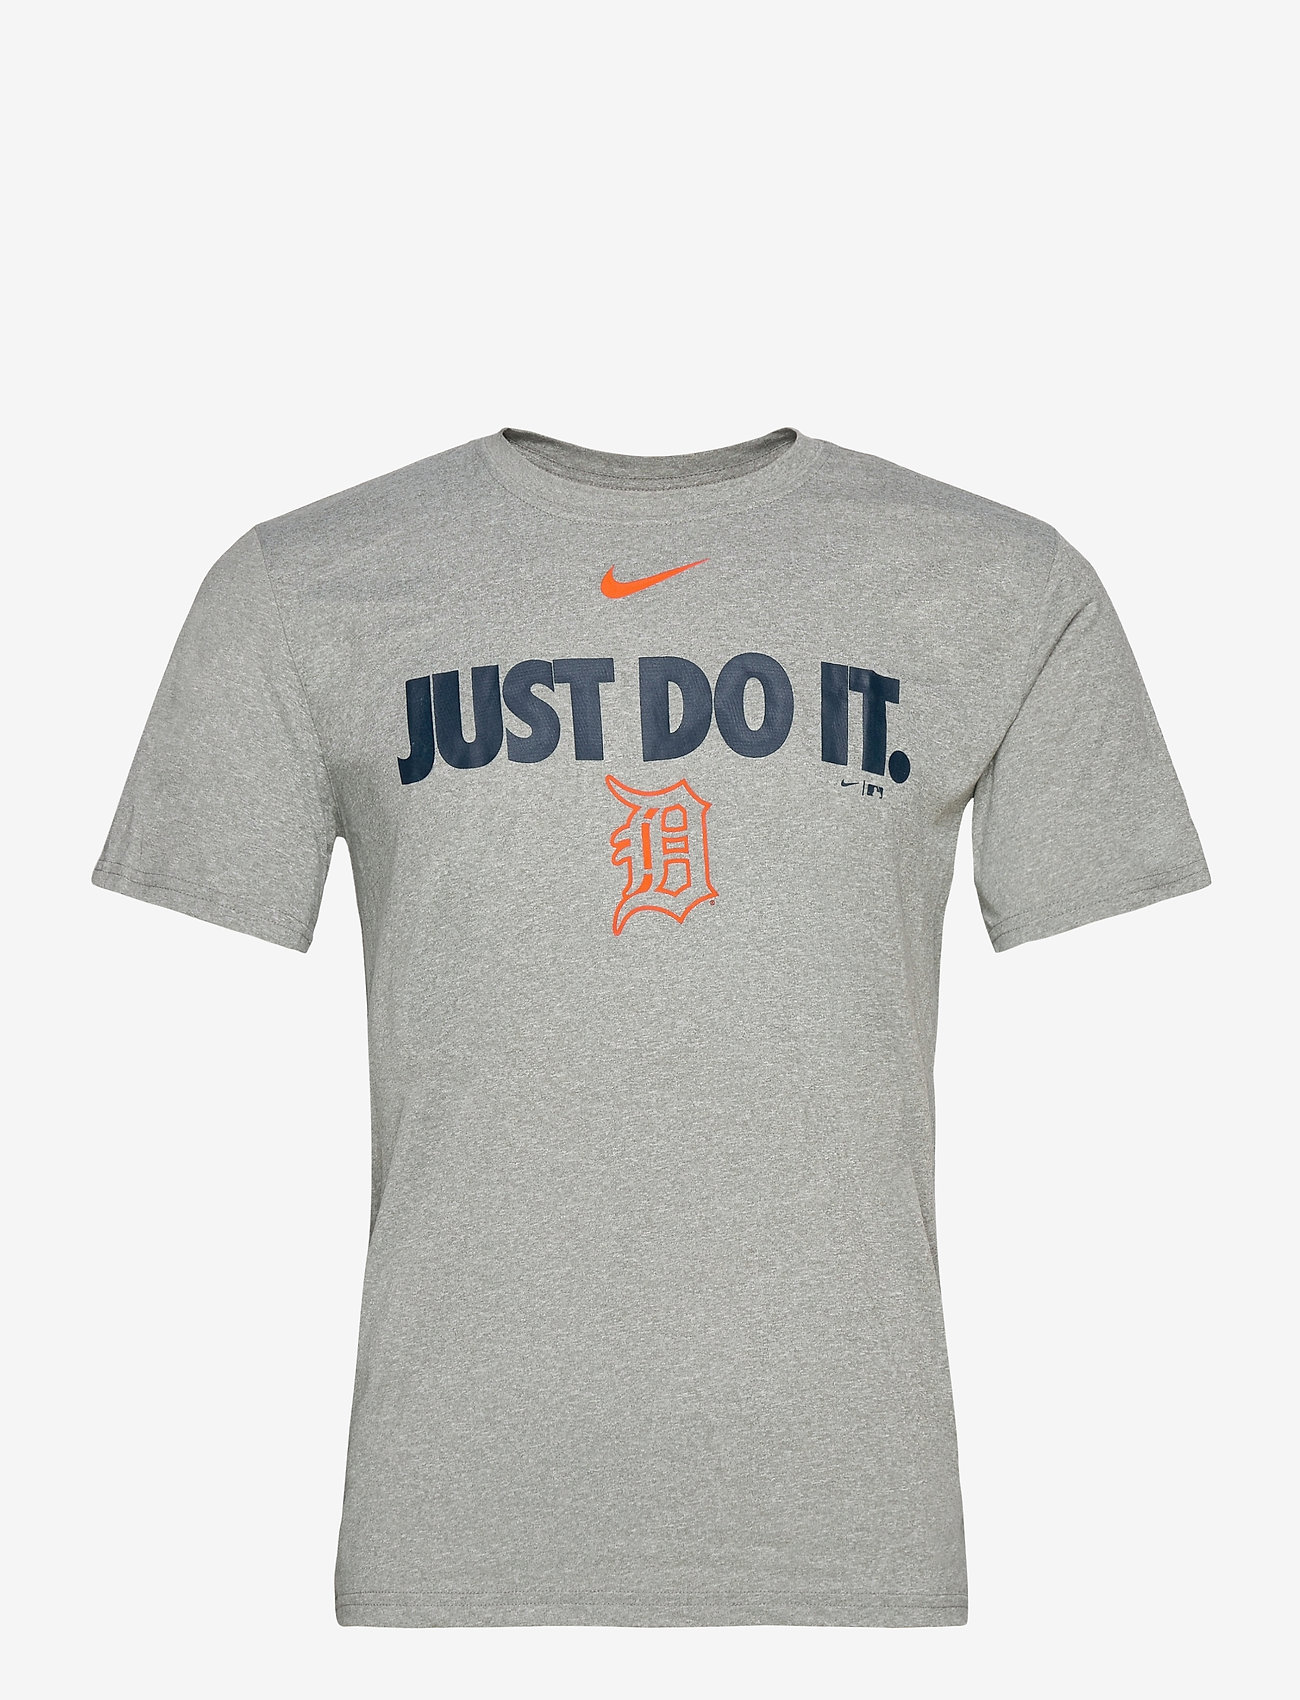 Detroit Tigers Nike Team Just Do It 